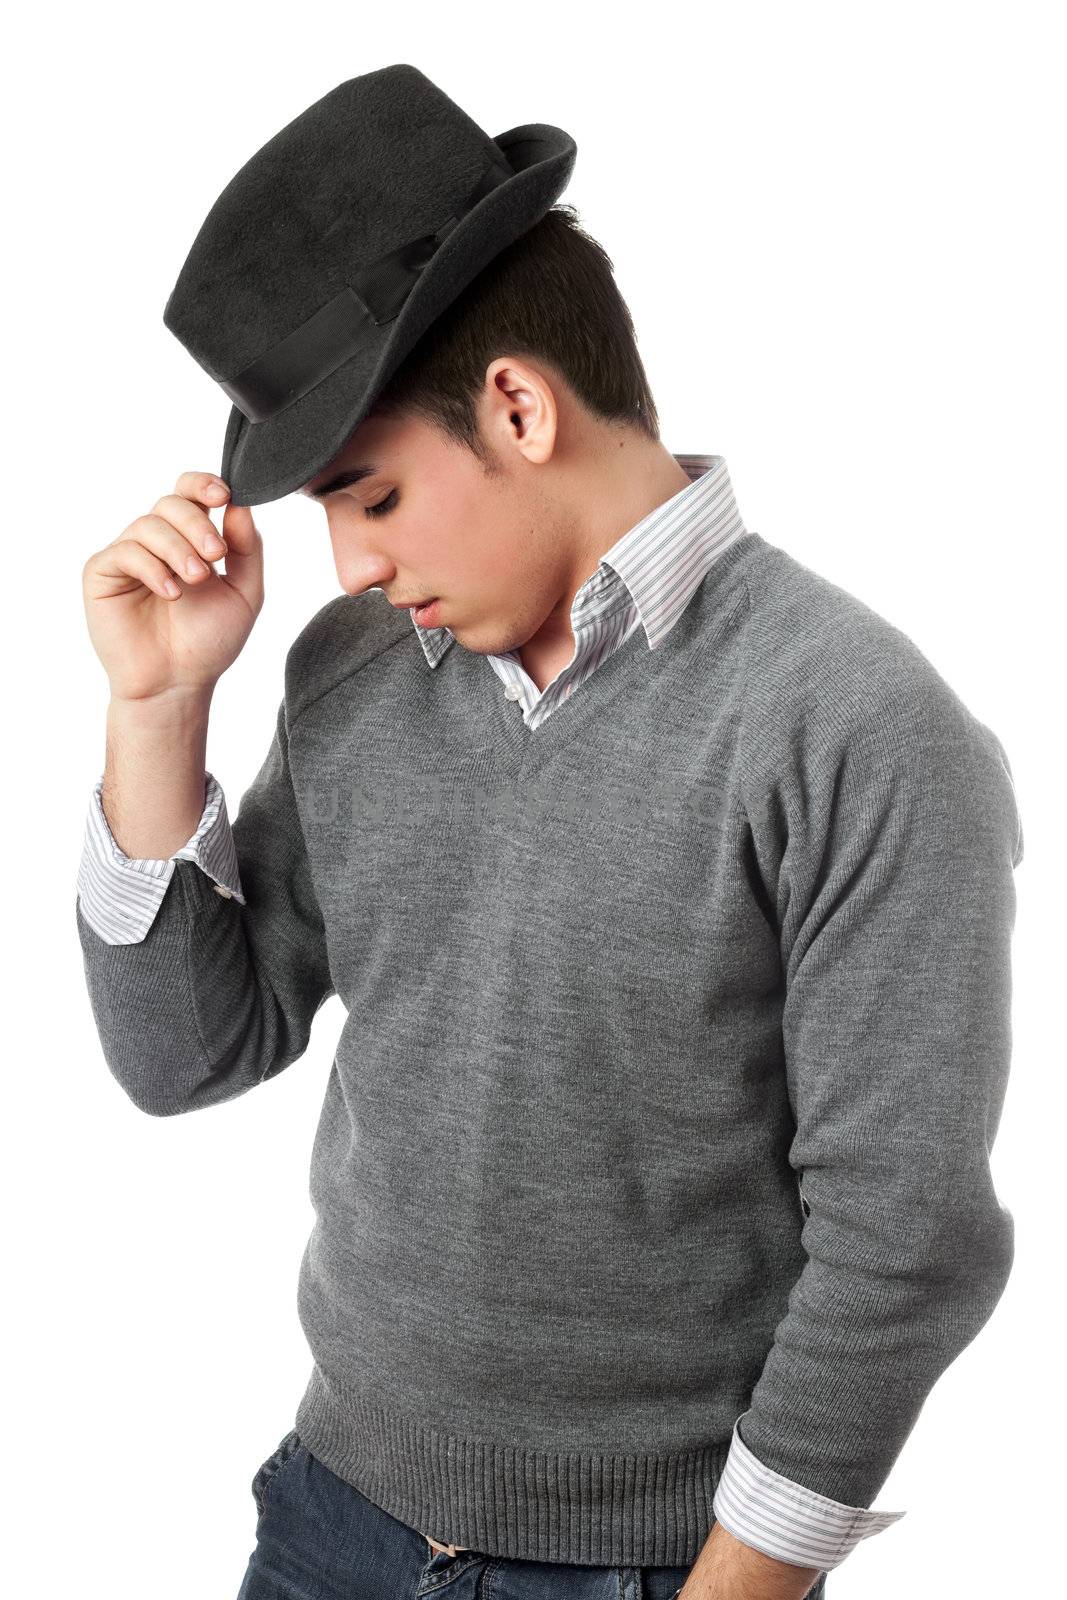 Handsome young man wearing black hat. Isolated on white